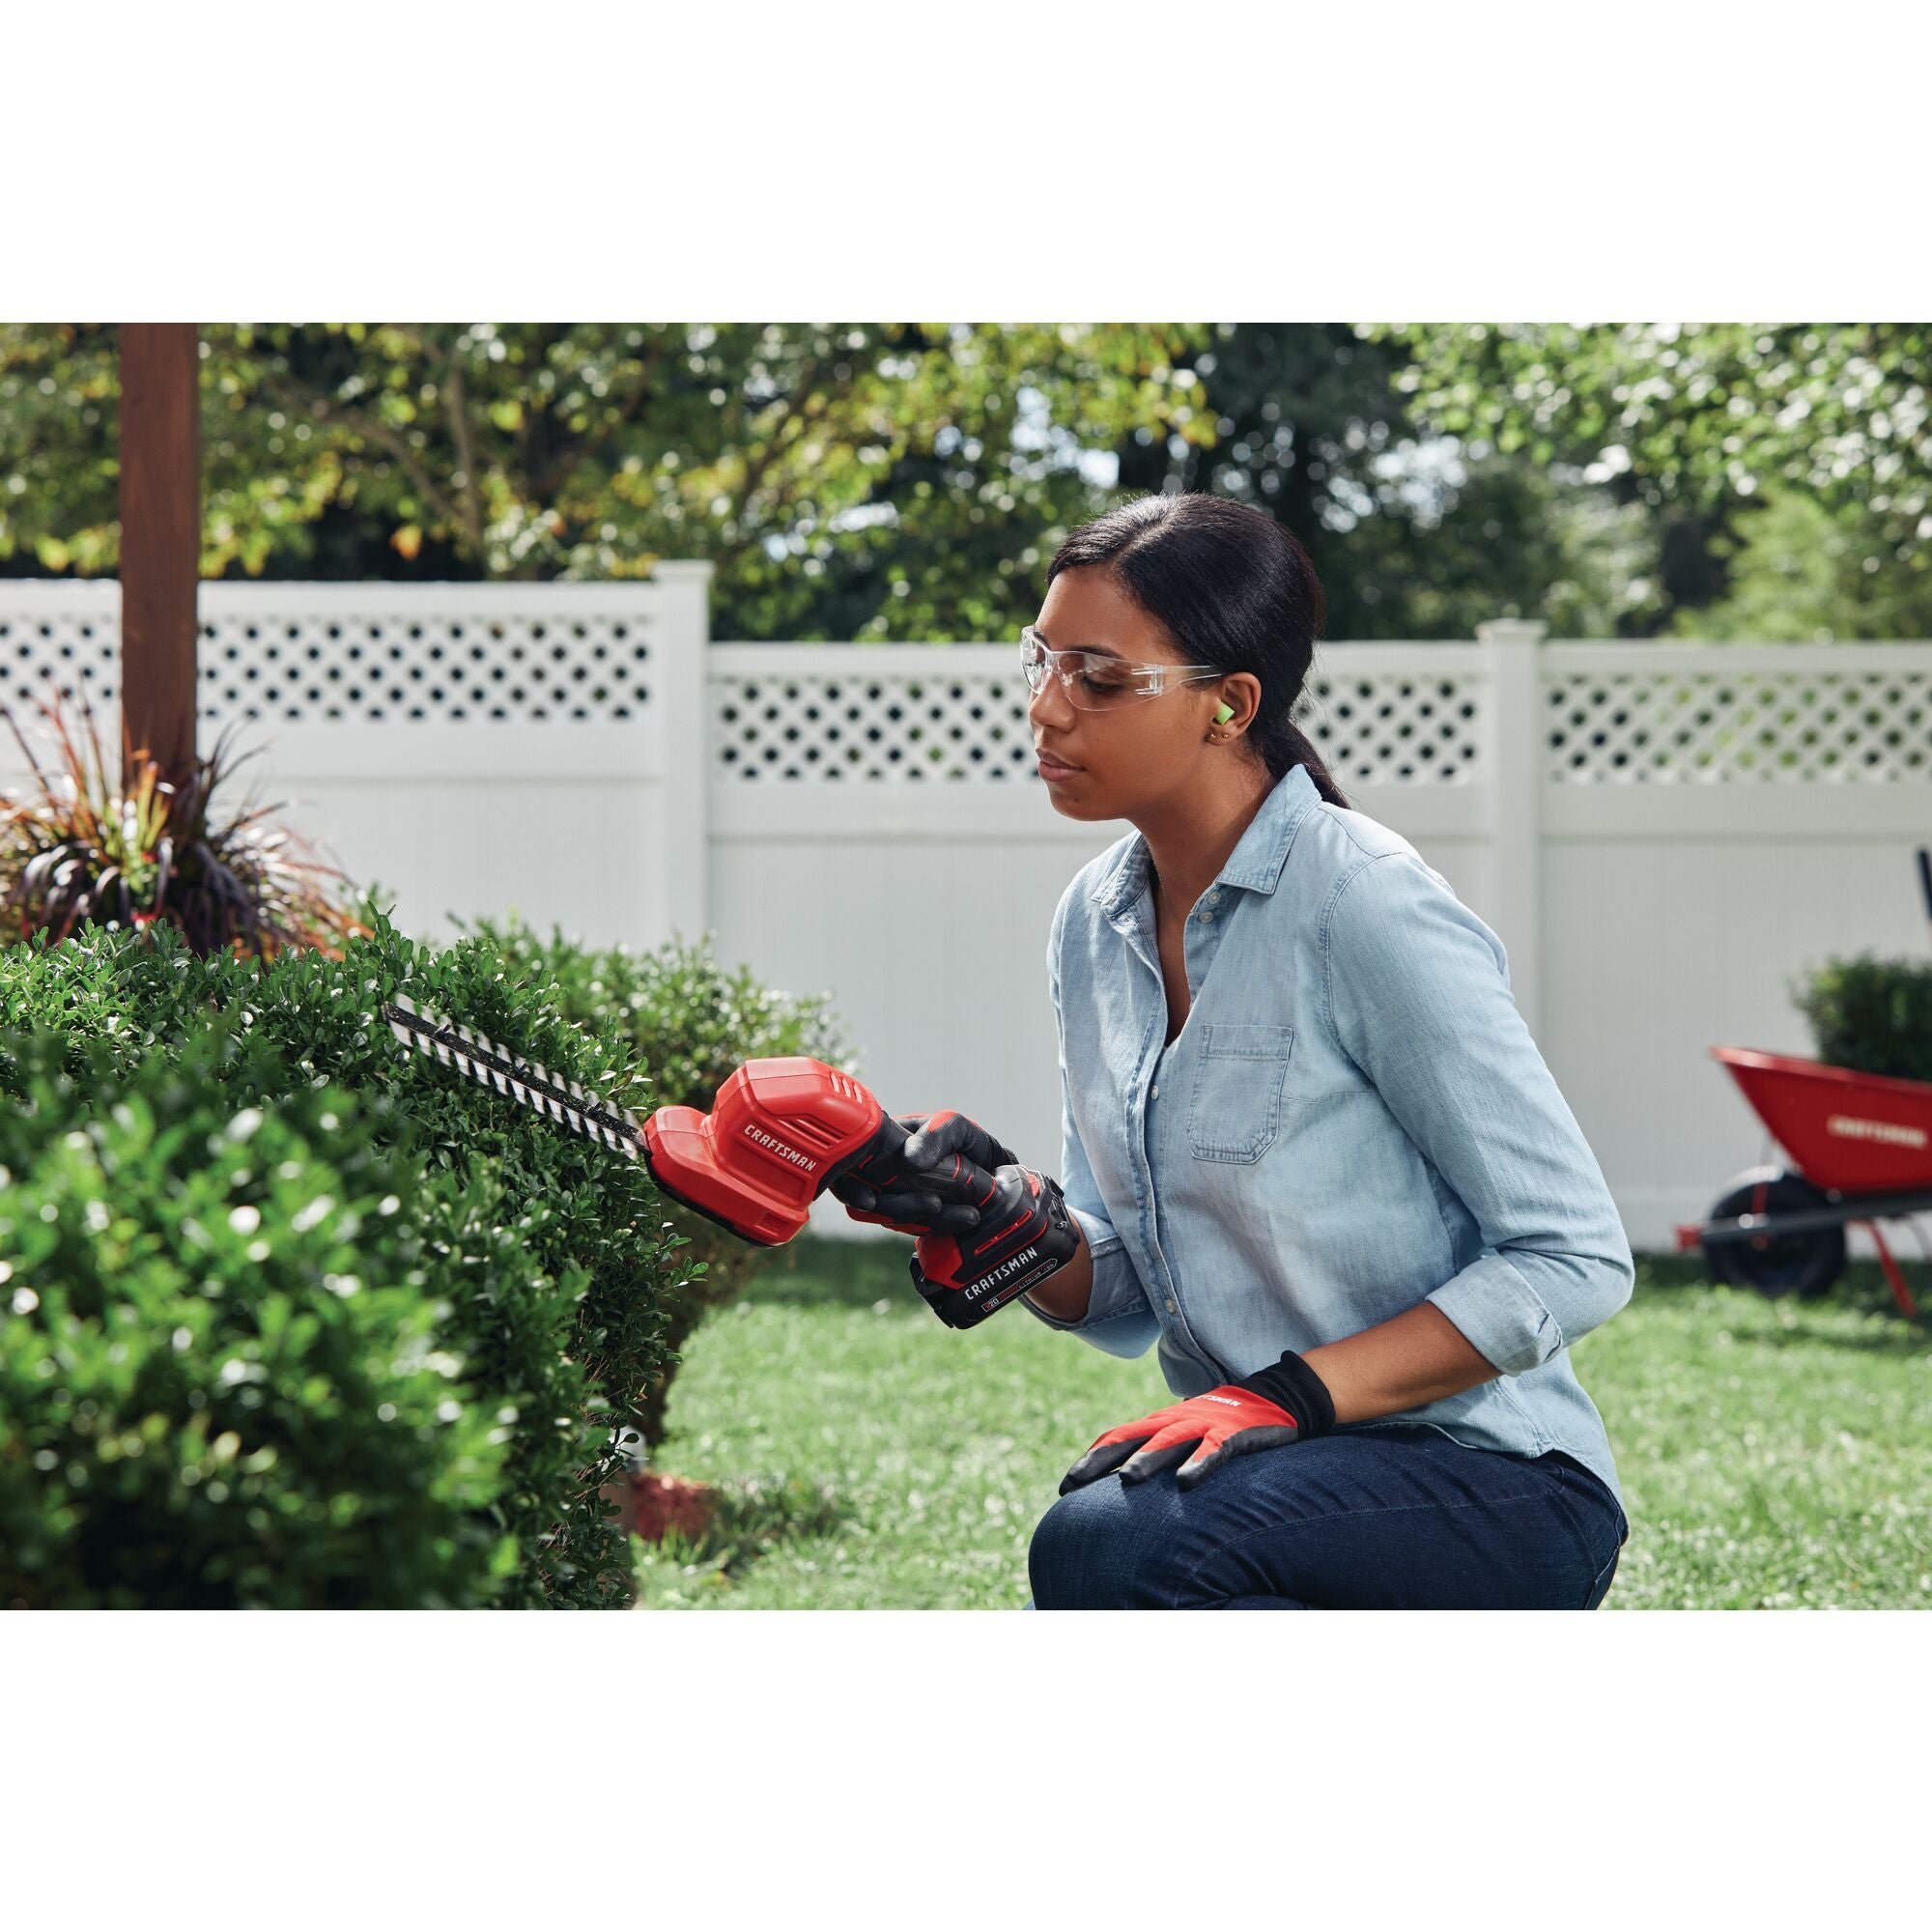 View of CRAFTSMAN Hedge Trimmers  being used by consumer